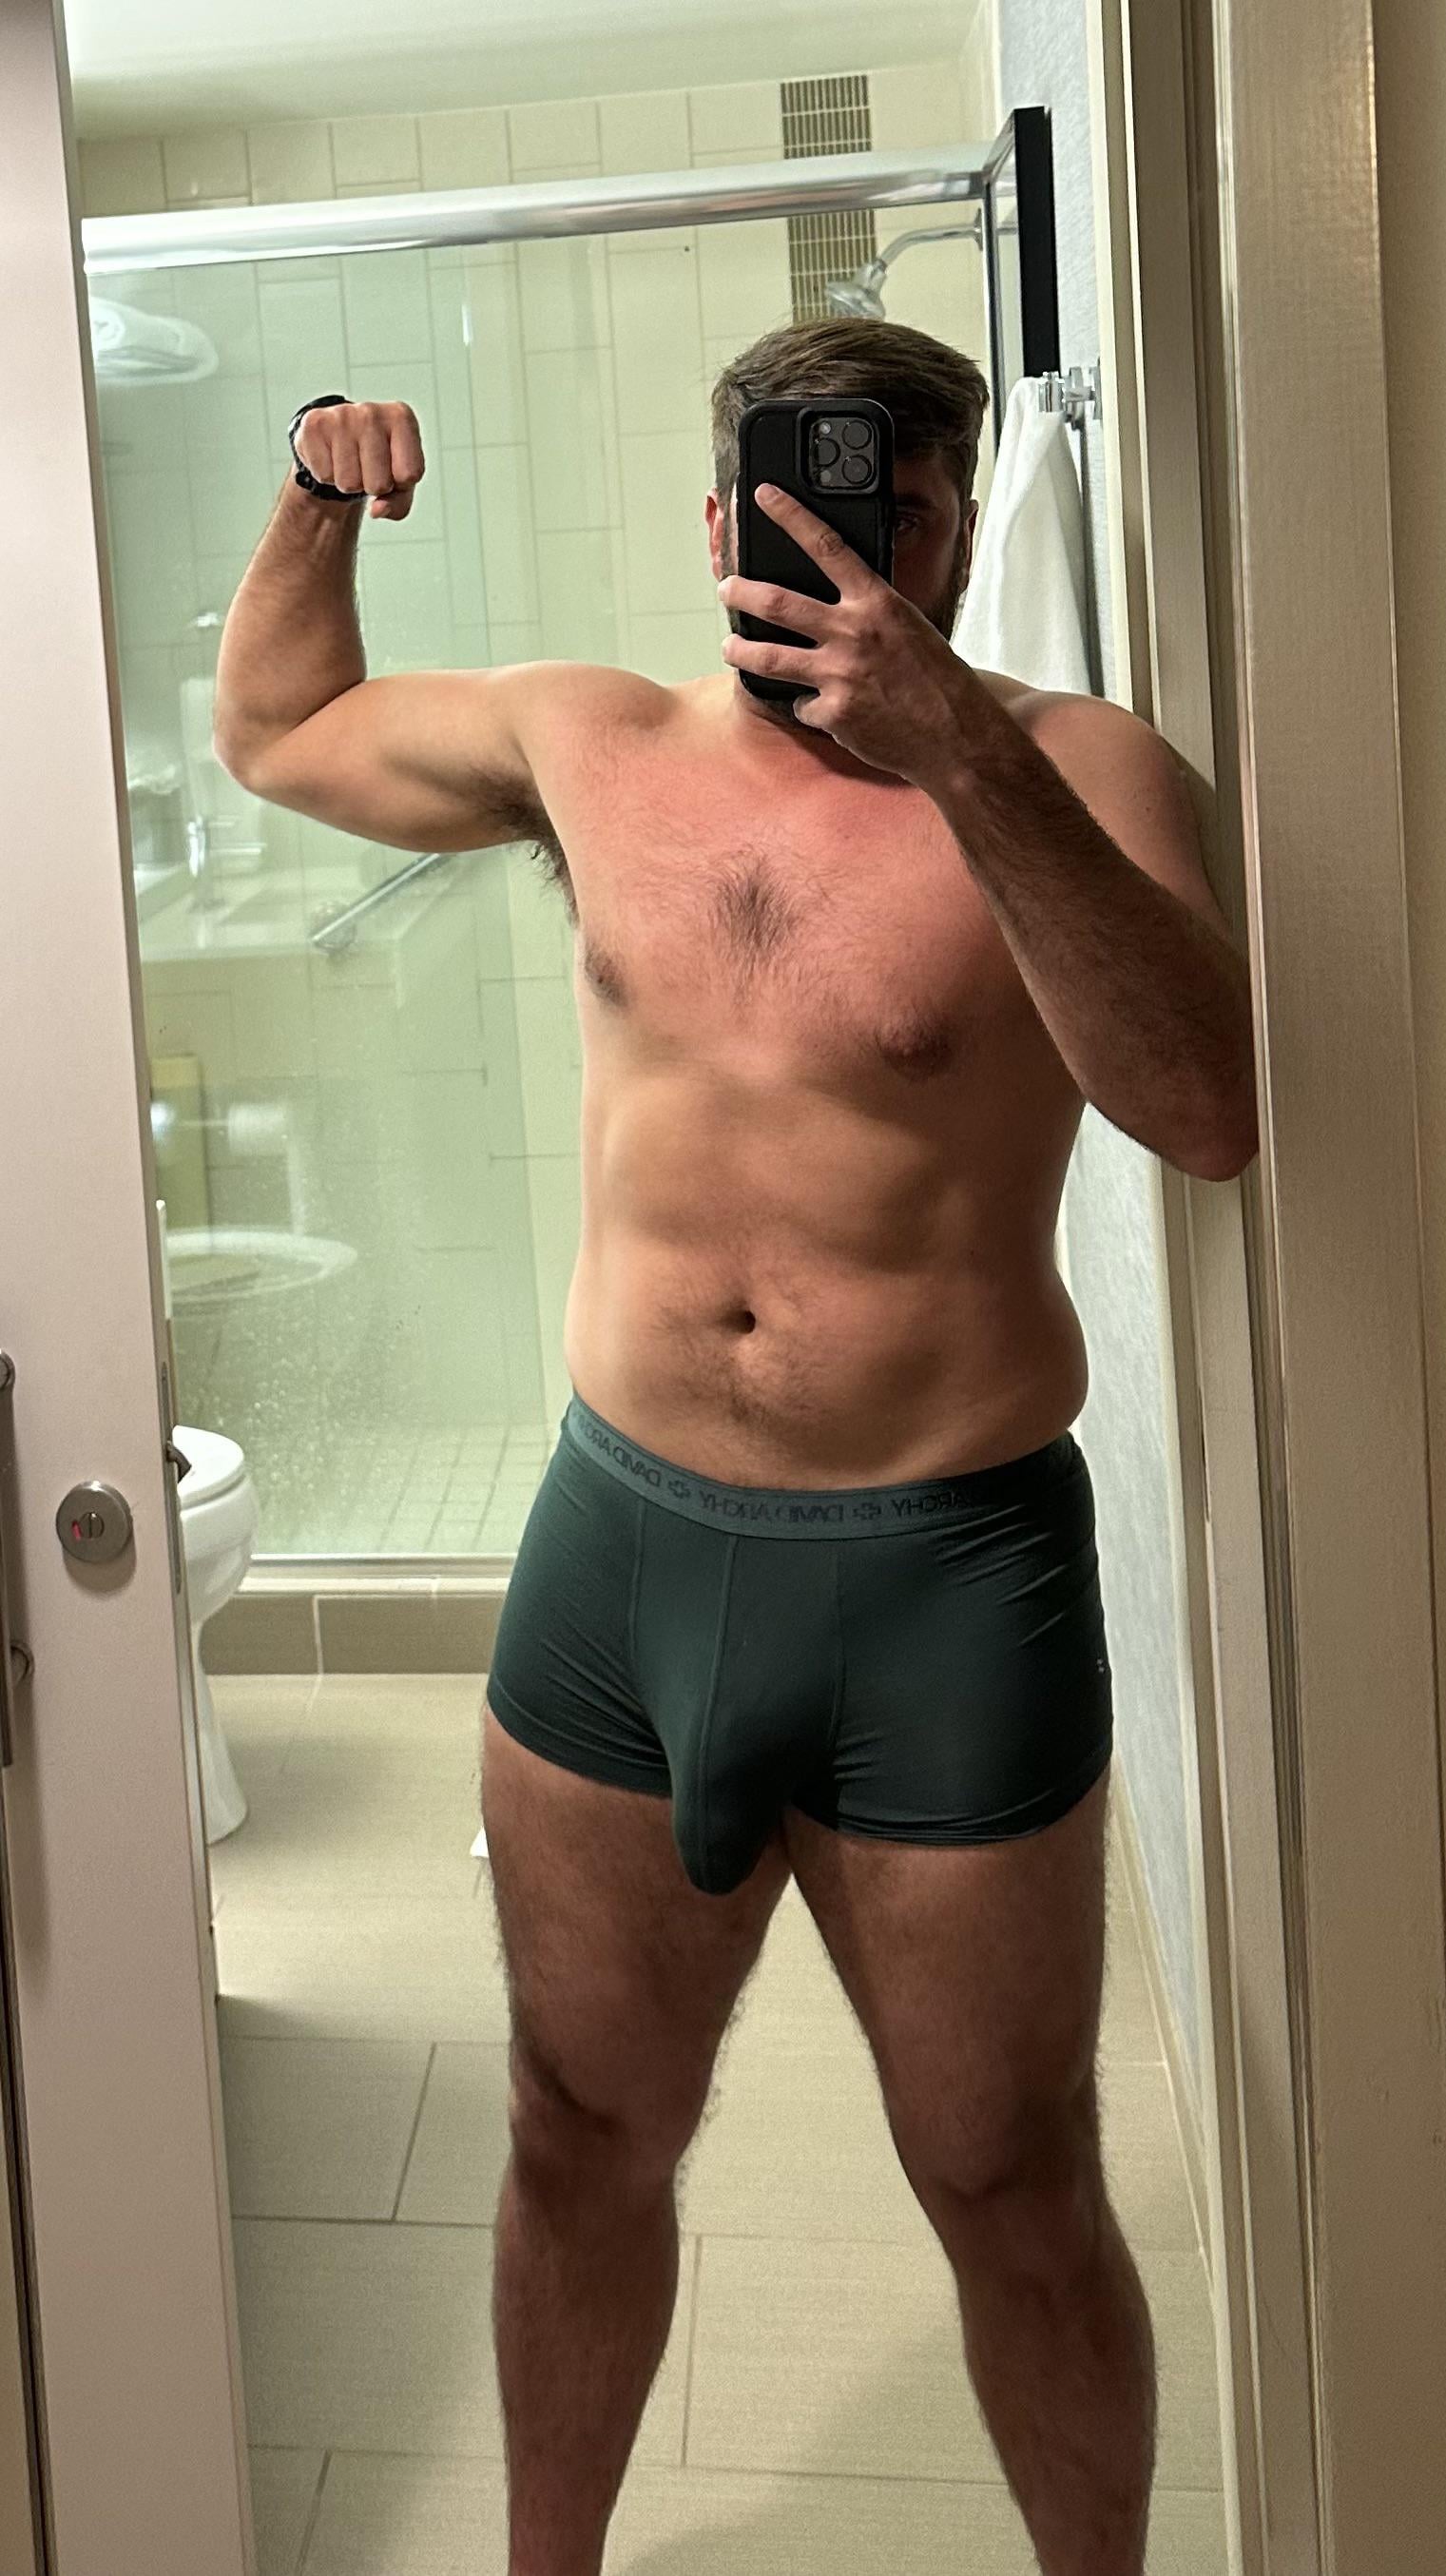 Any love for the dadbod